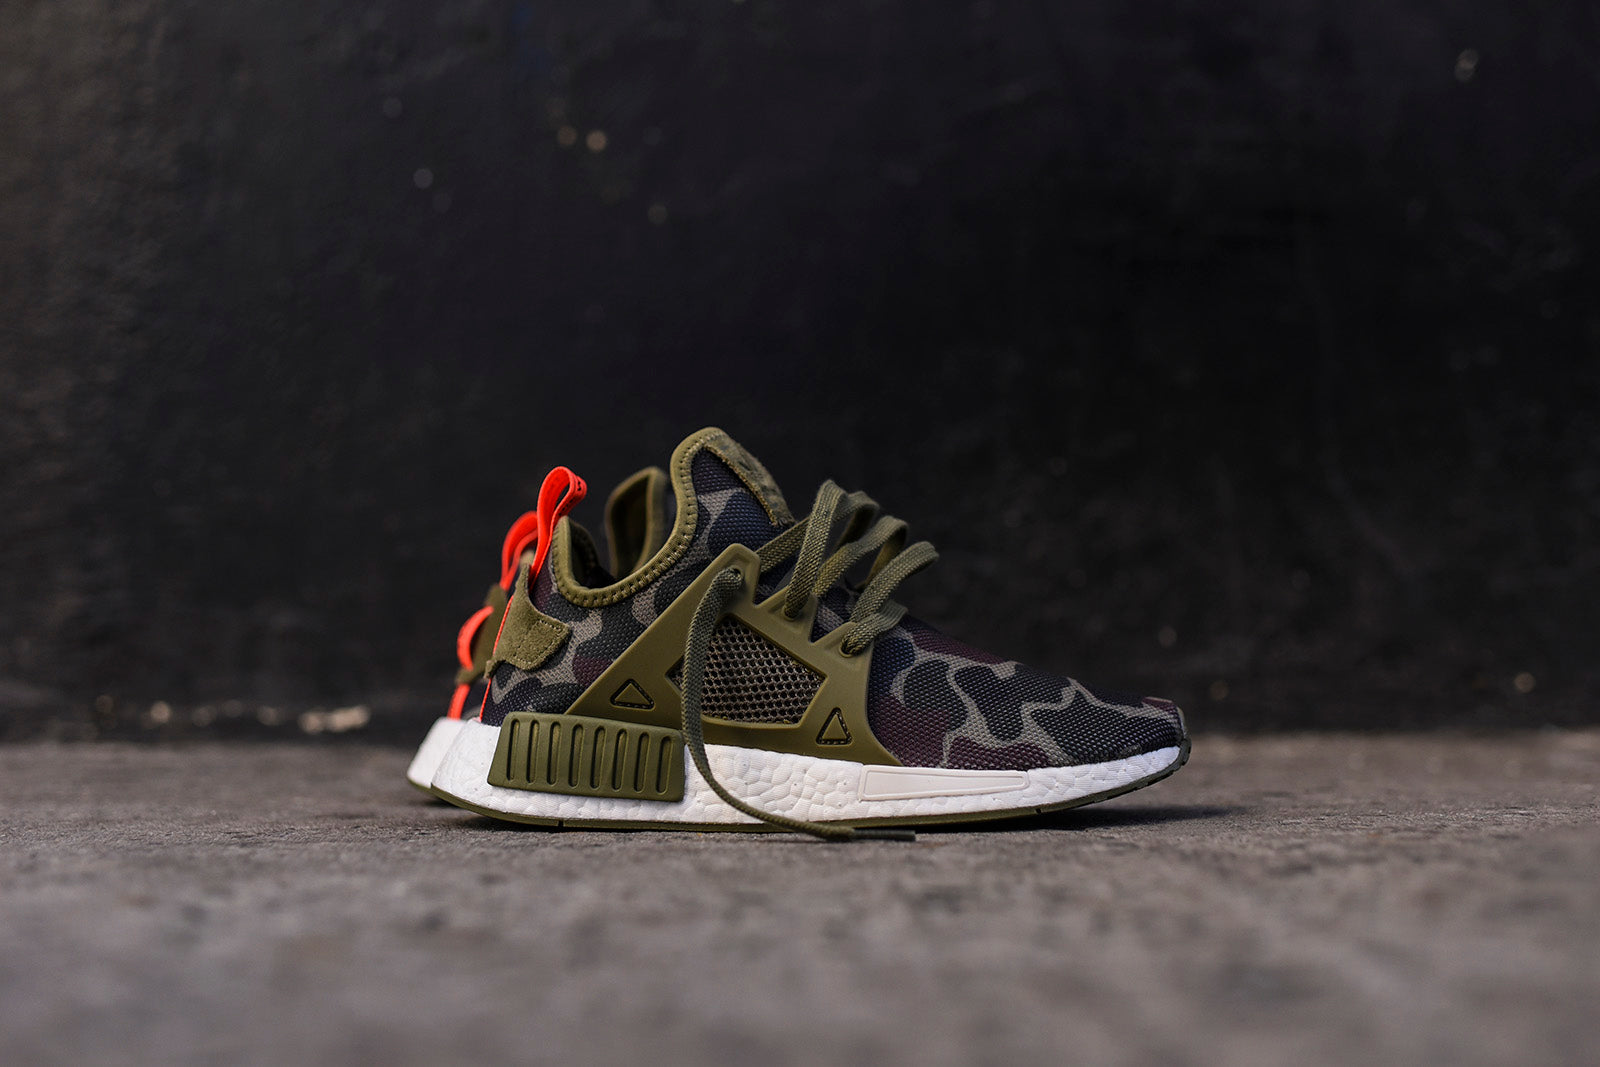 adidas Originals NMD_ XR1 Duck Camo Pack Kith